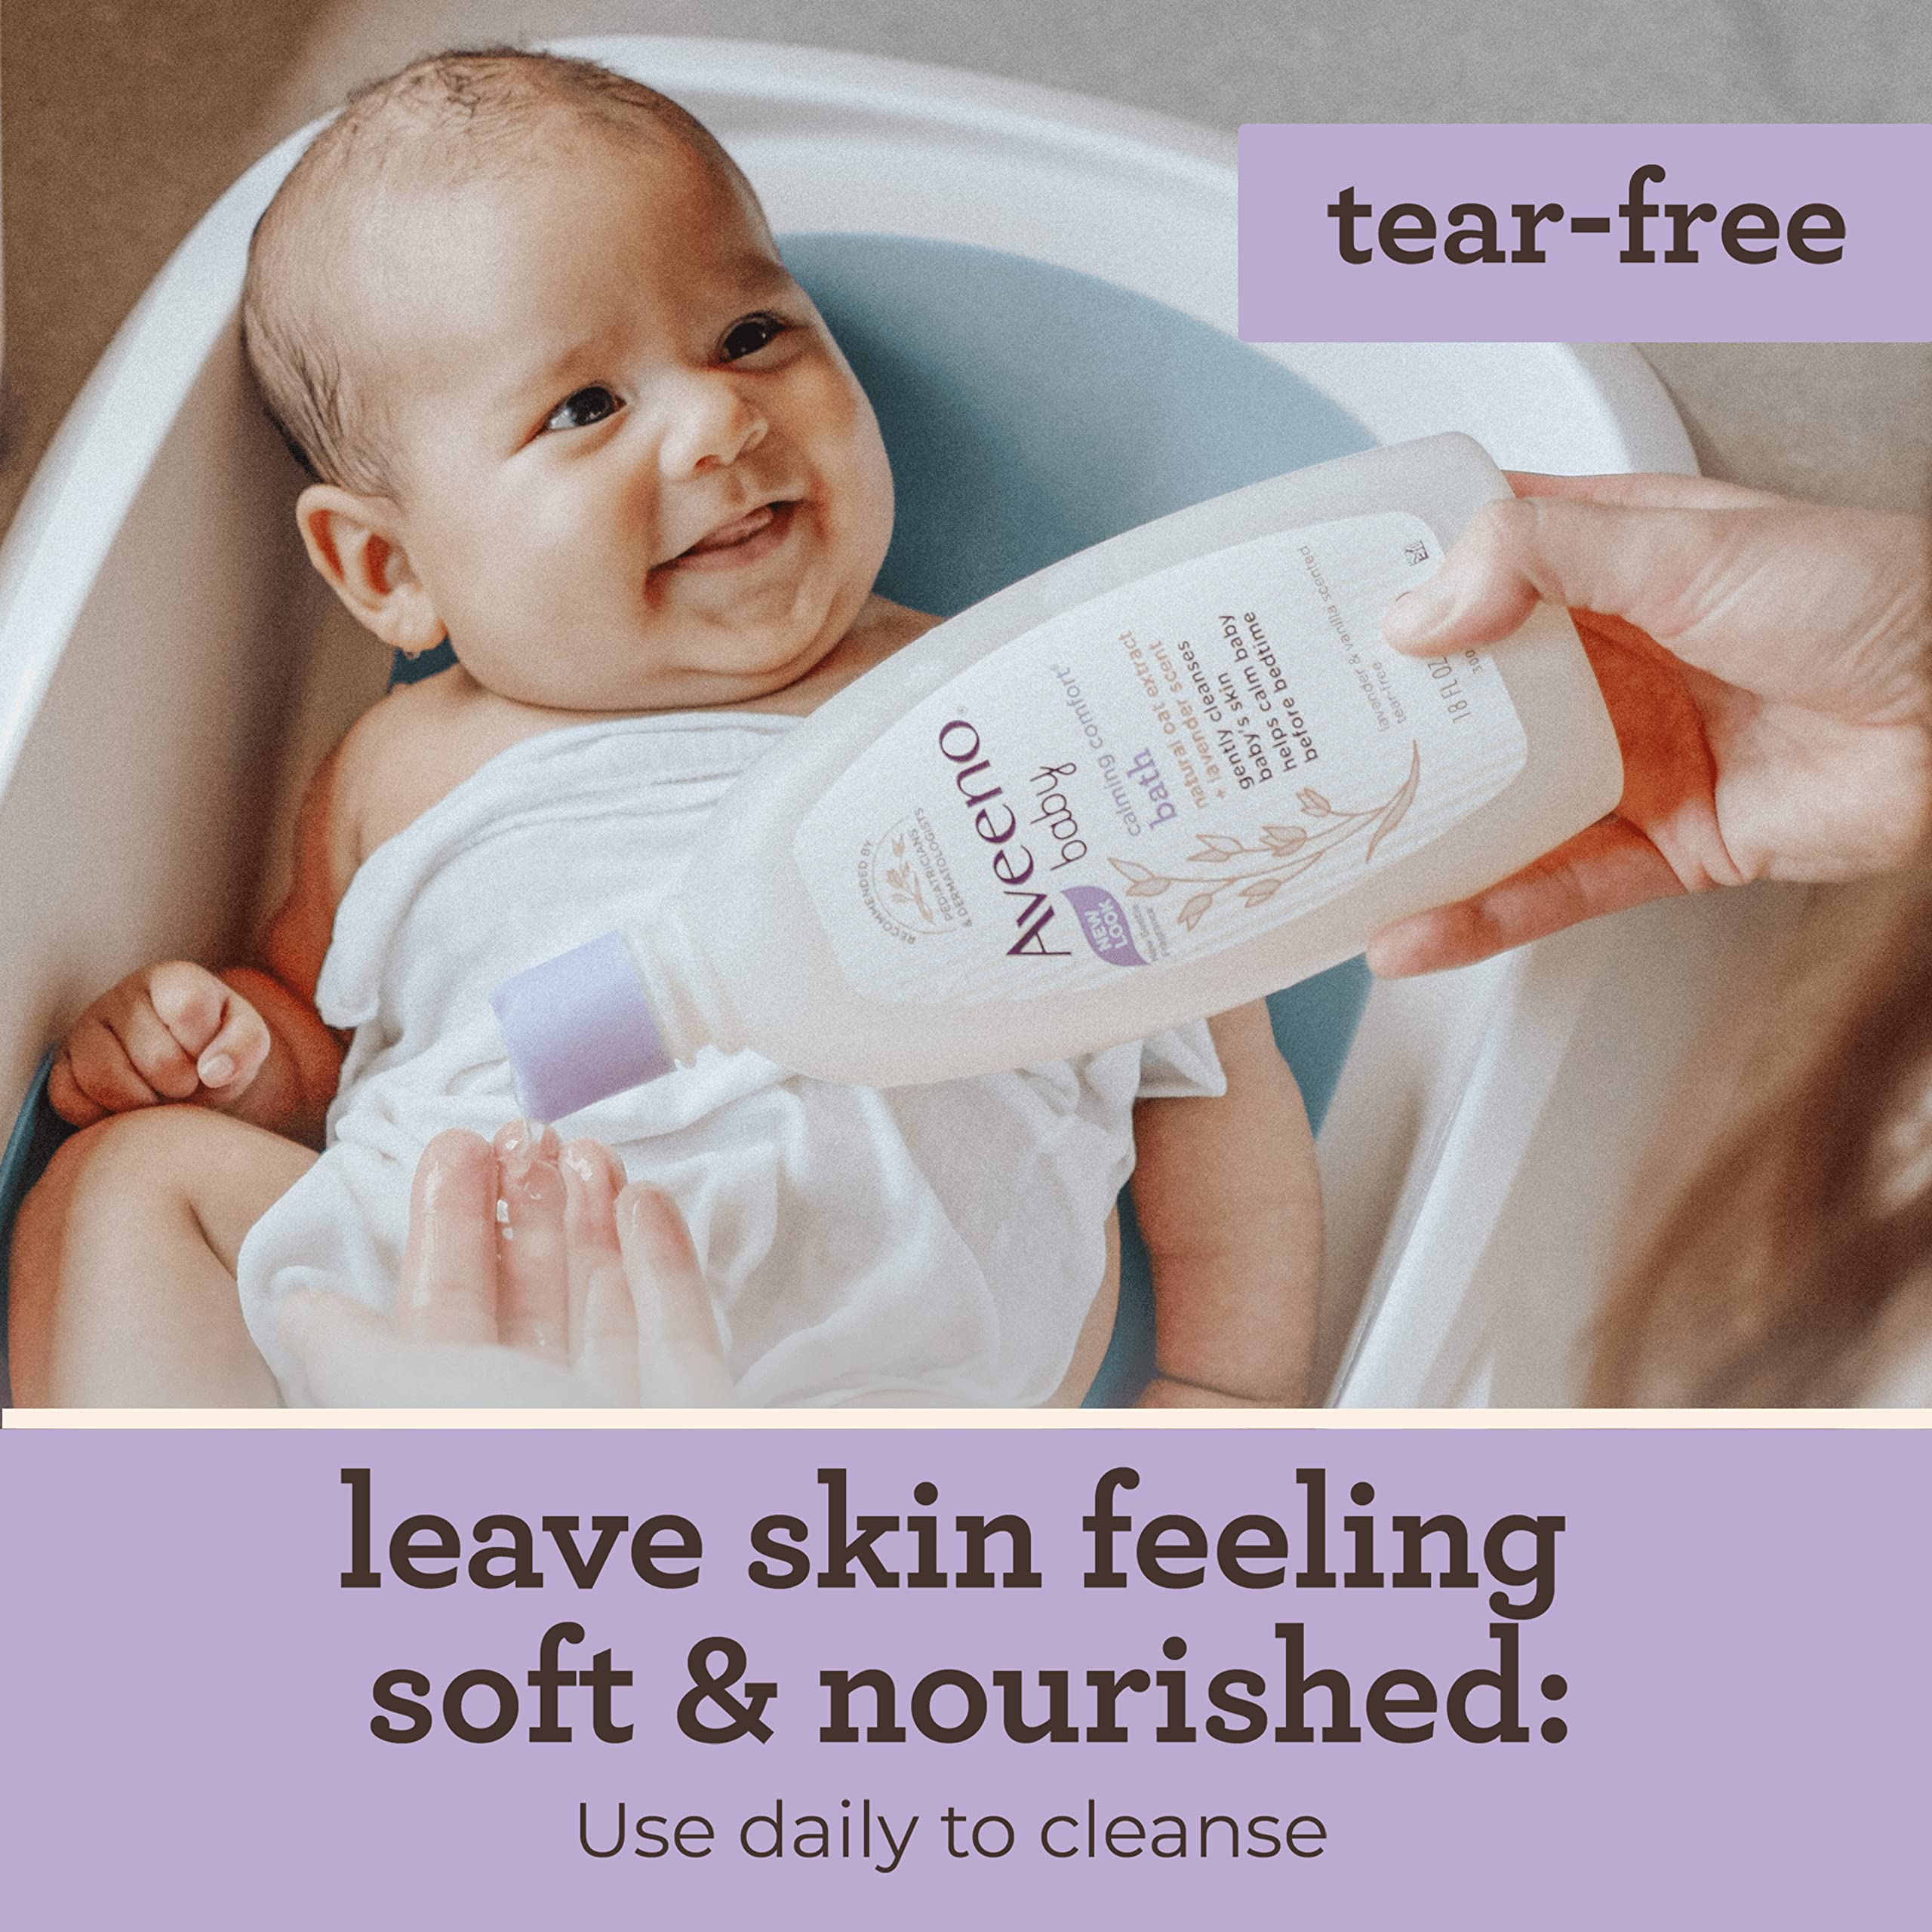 Aveeno Baby Calming Comfort Bath with Relaxing Lavender & Vanilla Scents, Hypoallergenic & Tear-Free Formula, Paraben- & Phthalate-Free, 18 Fl Oz (Pack of 1)